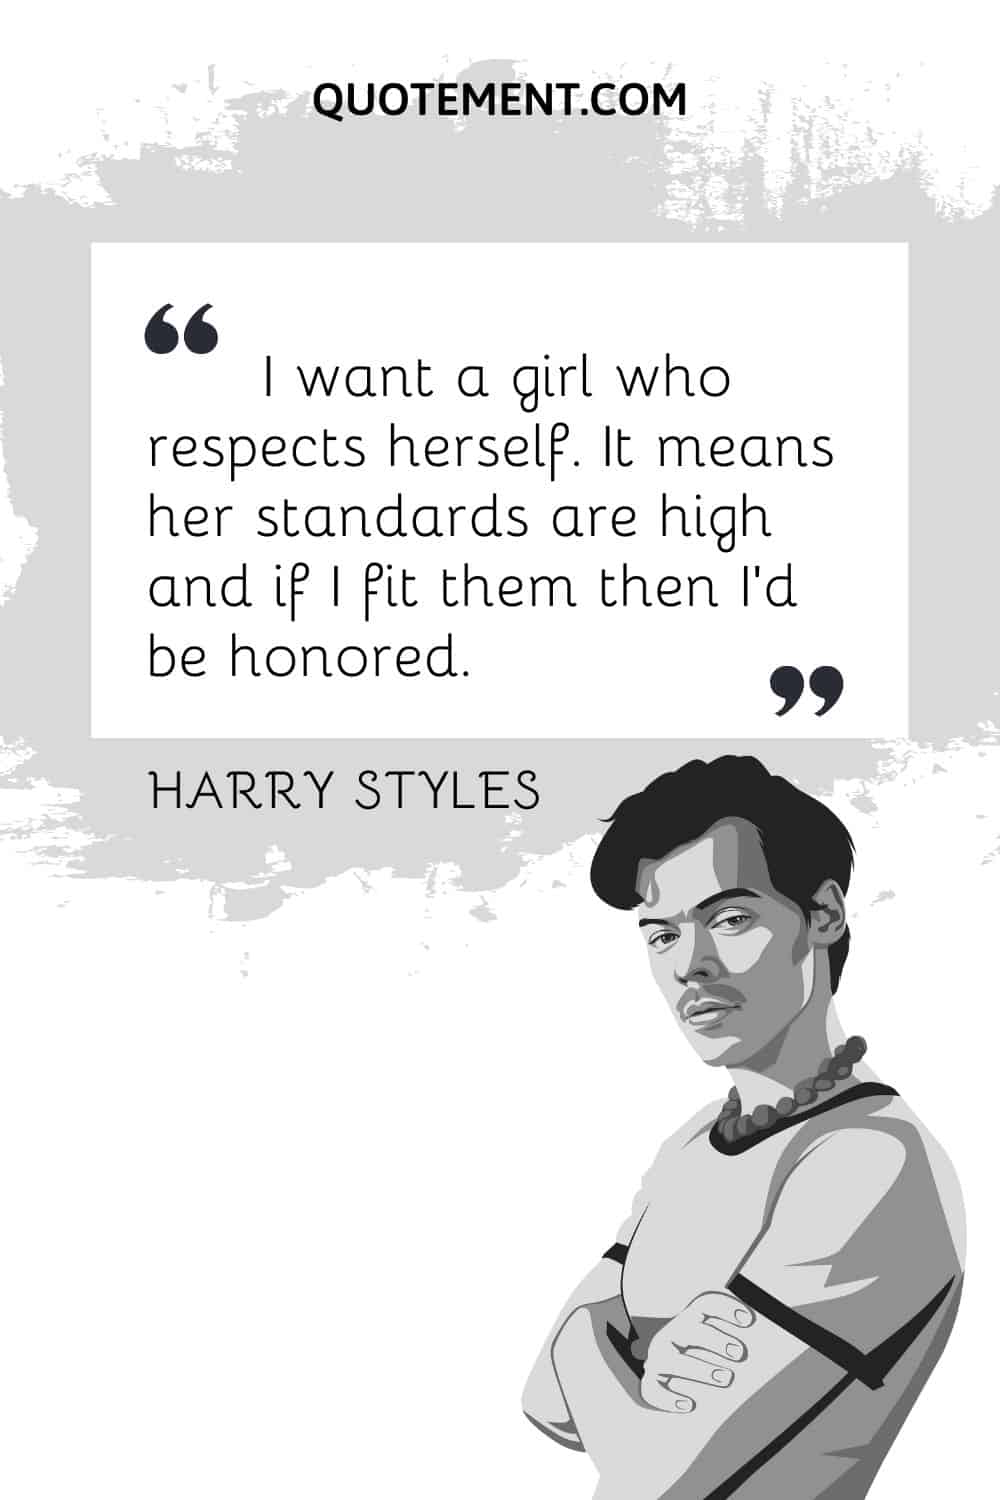 I want a girl who respects herself